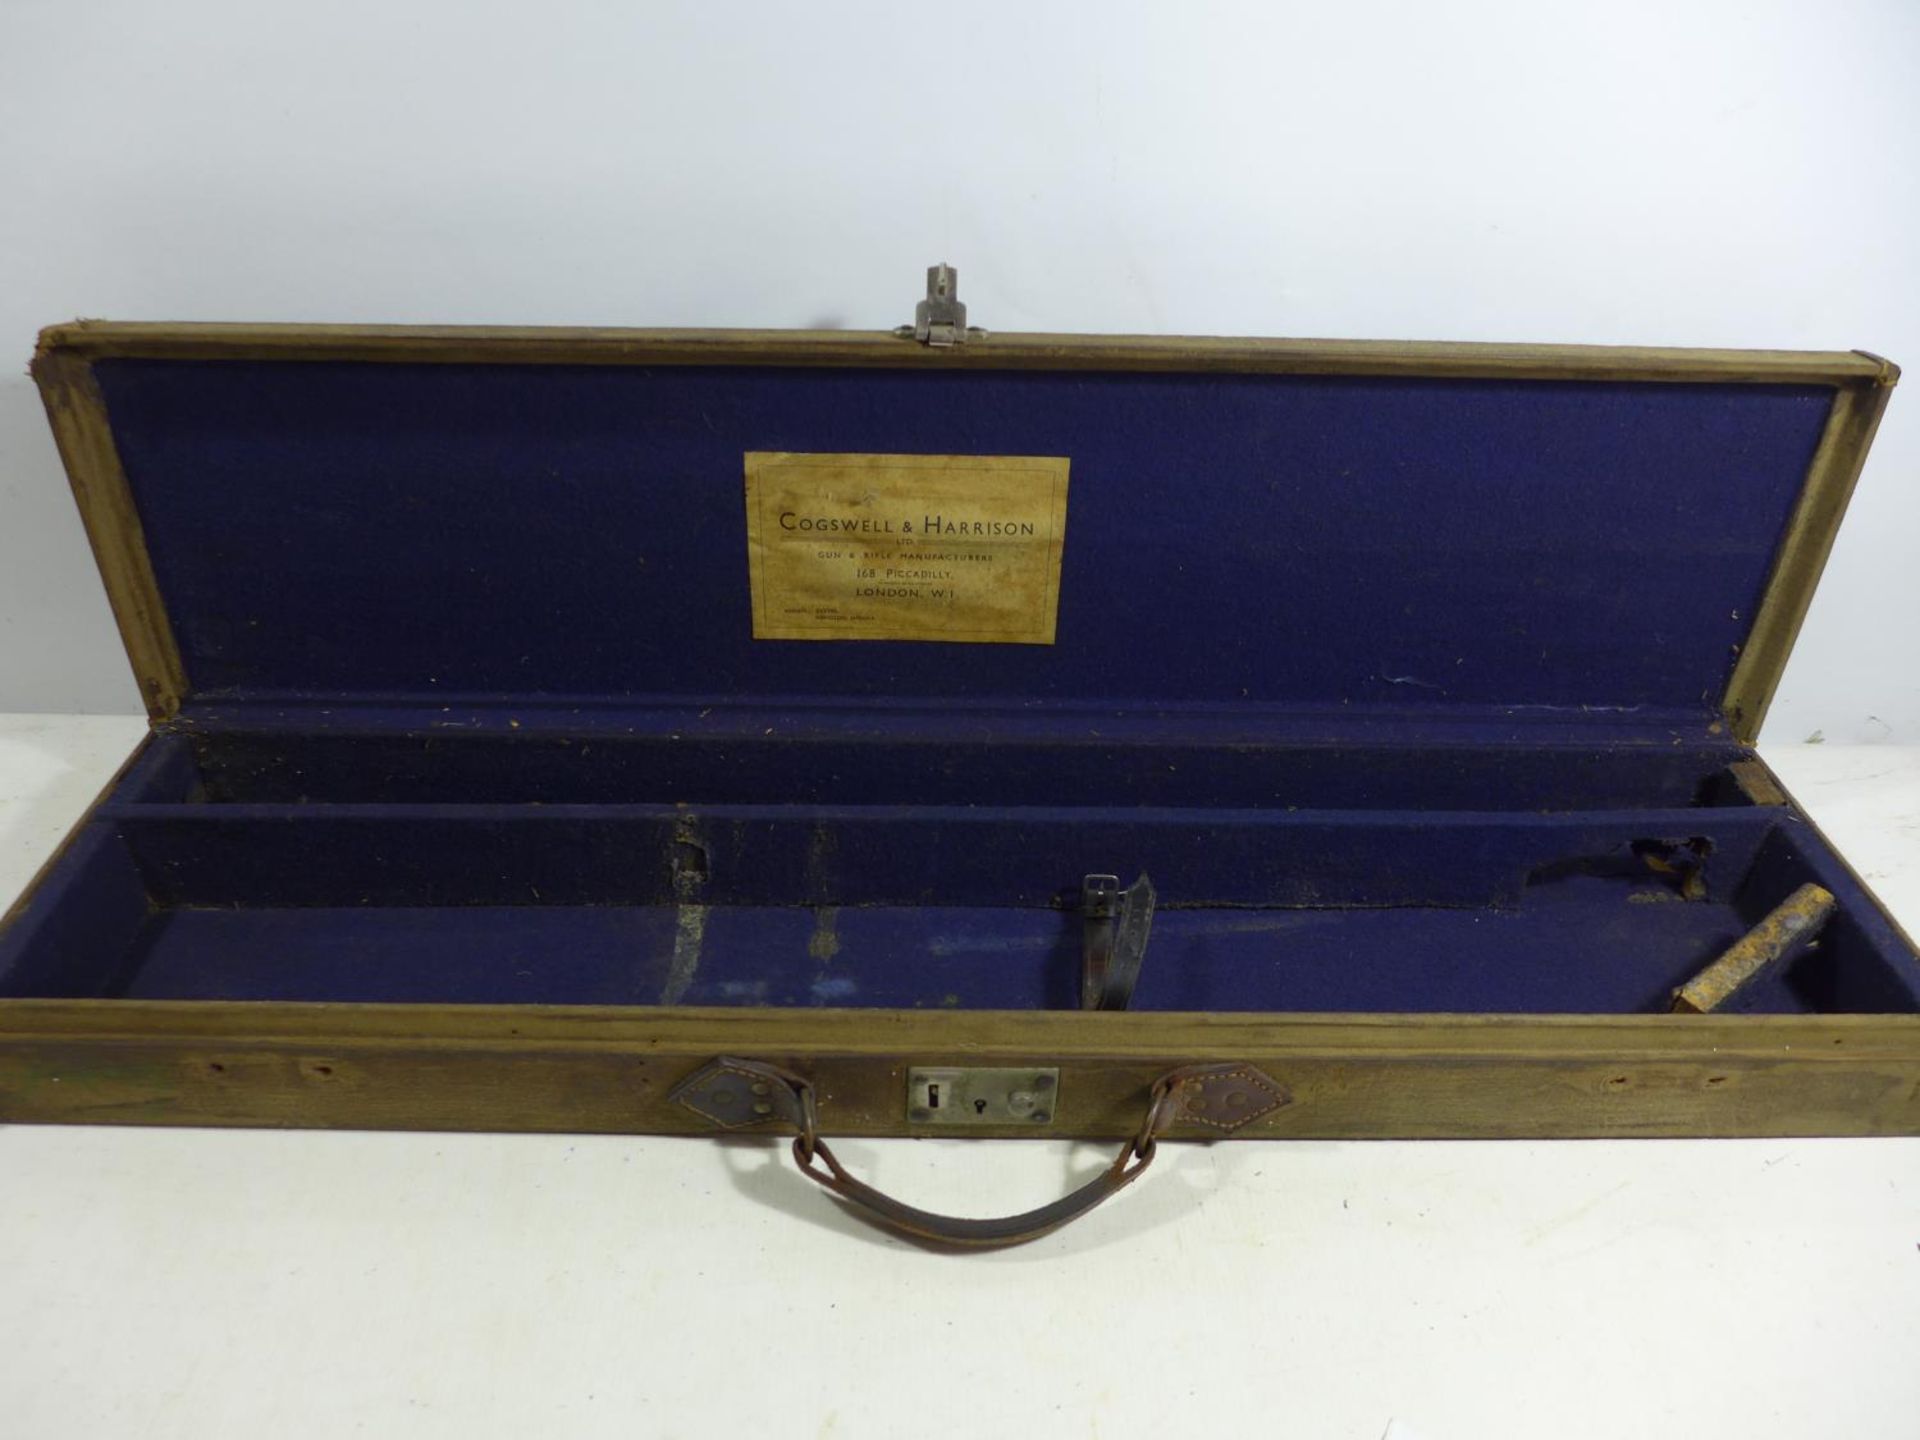 A COGSWELL AND HARRISON GUN CASE TO TAKE A 31 INCH BARREL GUN